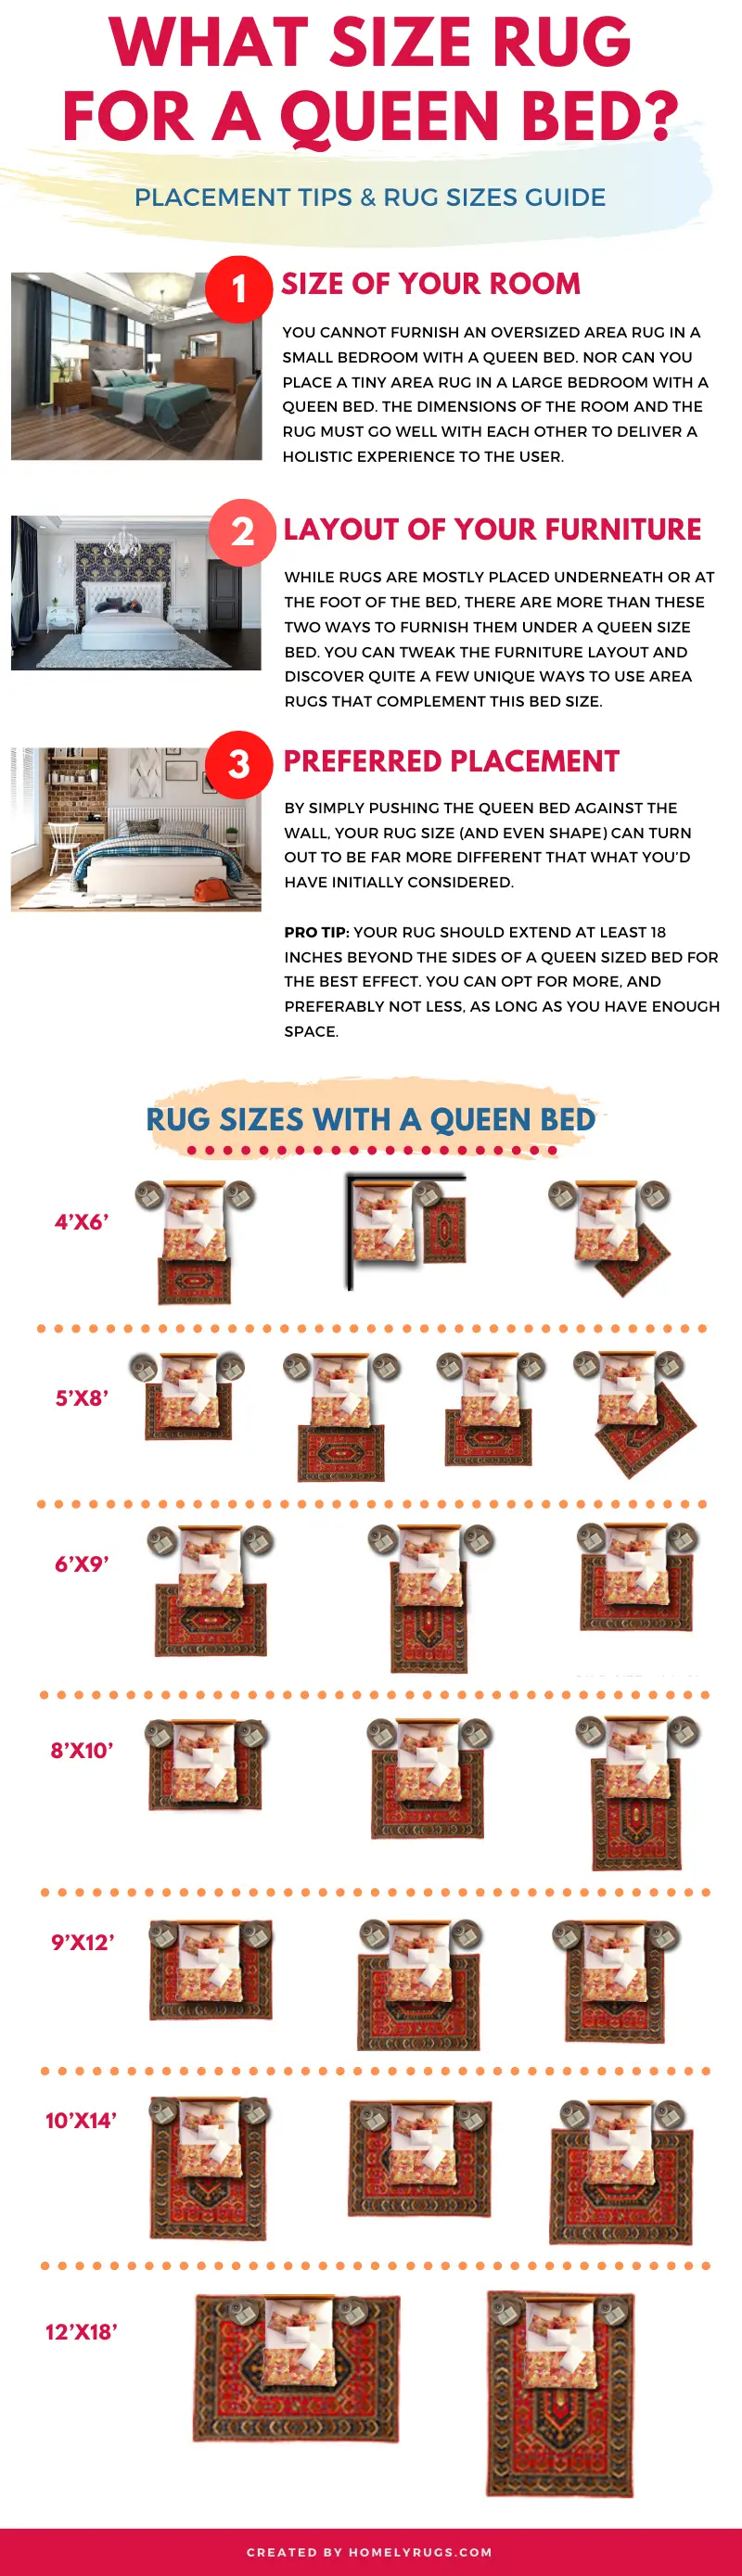 What Size Rug For A Queen Bed Chart, Runner Rug For Queen Bed